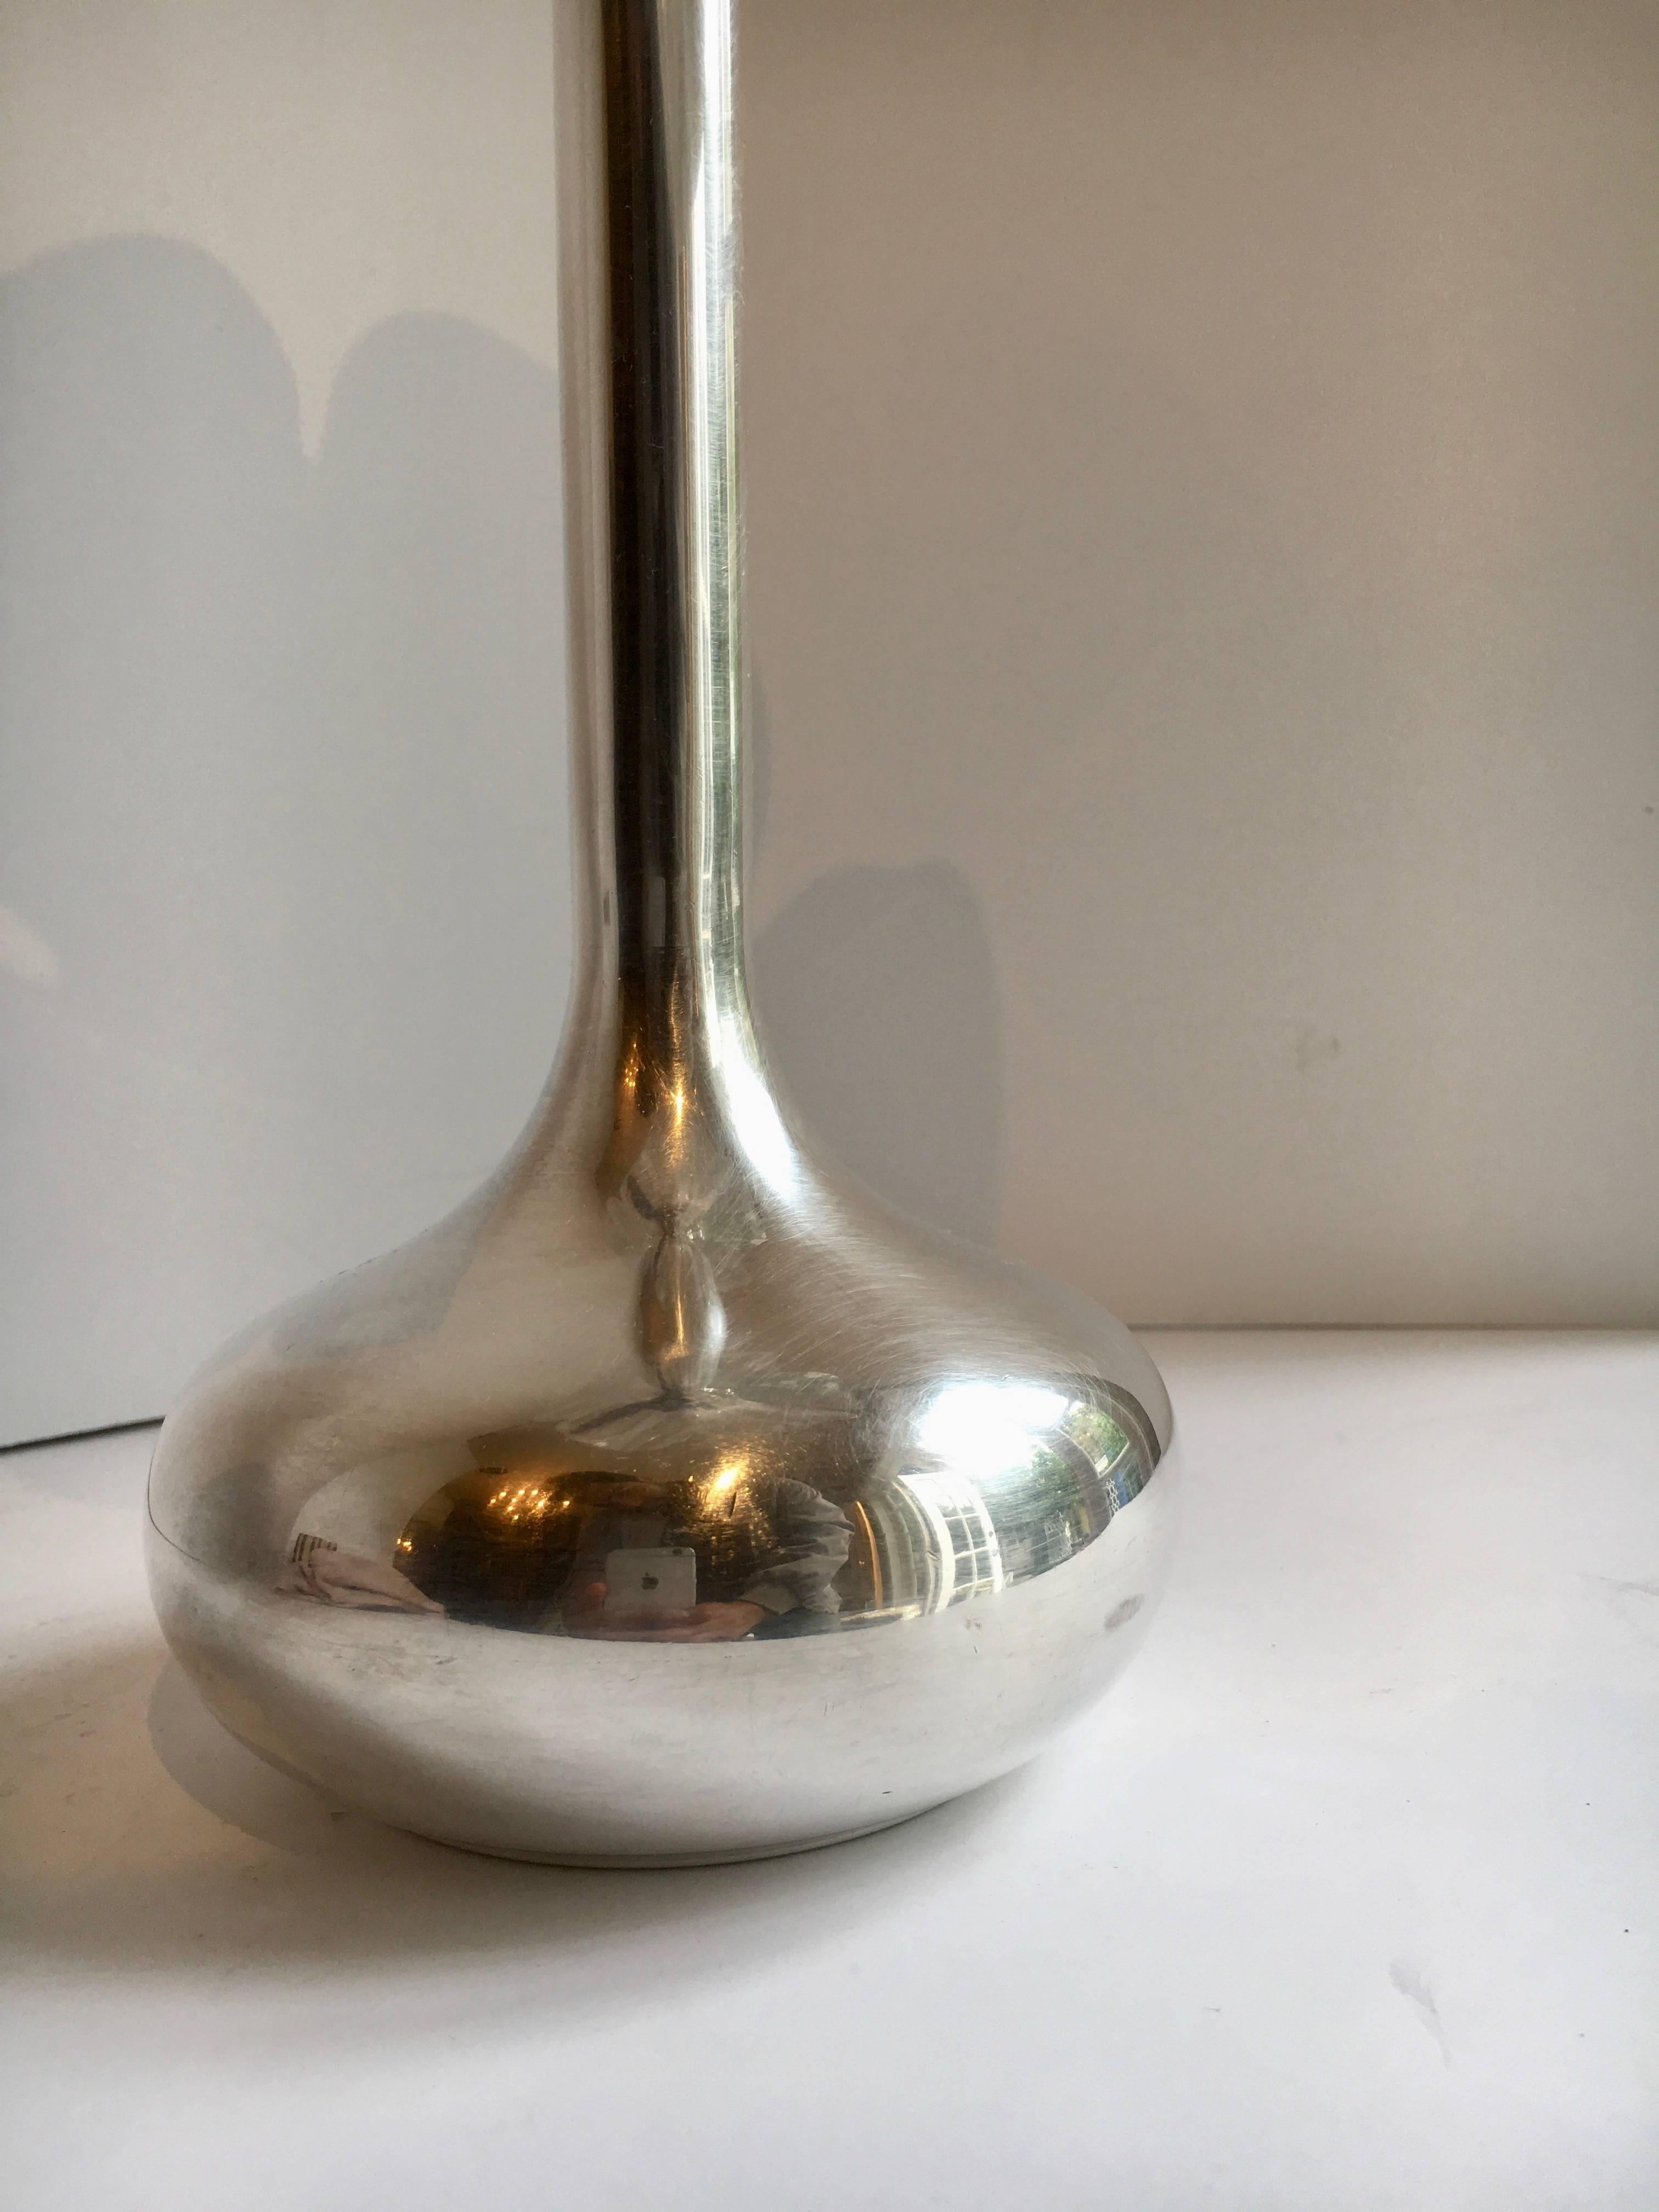 20th Century Silver Plate Flower Shaped Vase by Brazilian Artist Marilena Mariotto